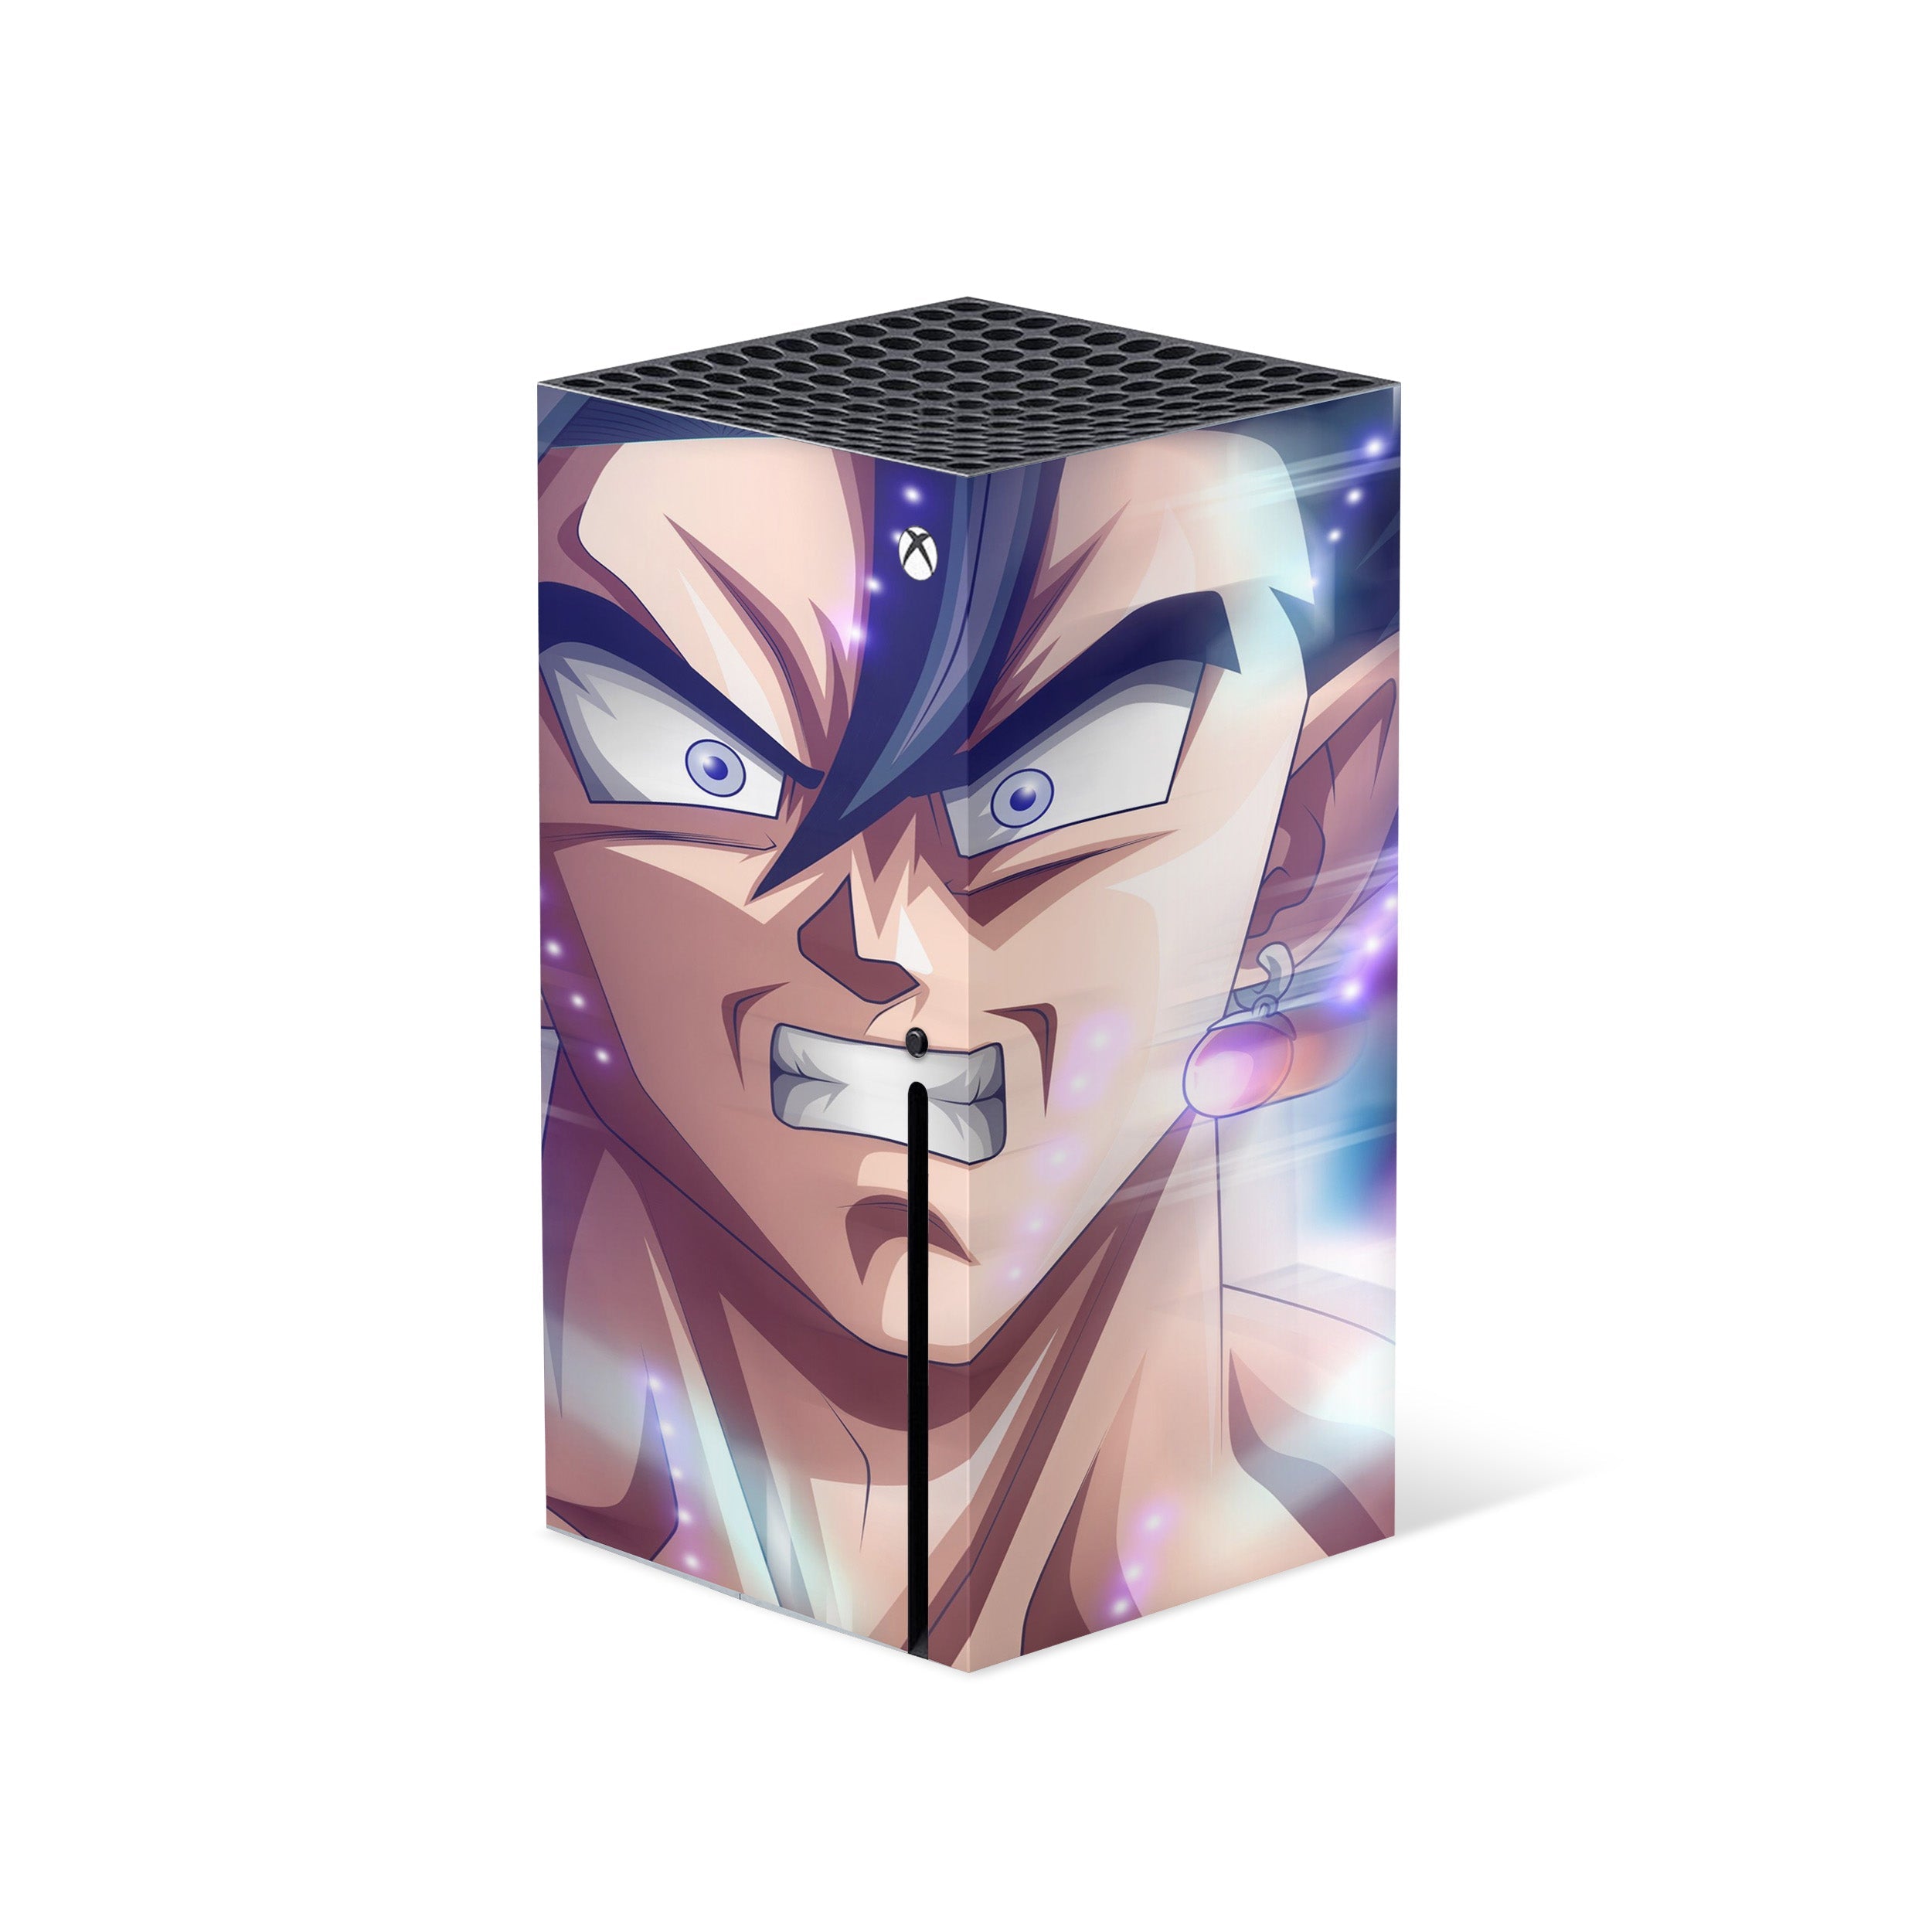 A video game skin featuring a Dragon Ball Fighterz Vegito design for the Xbox Series X.